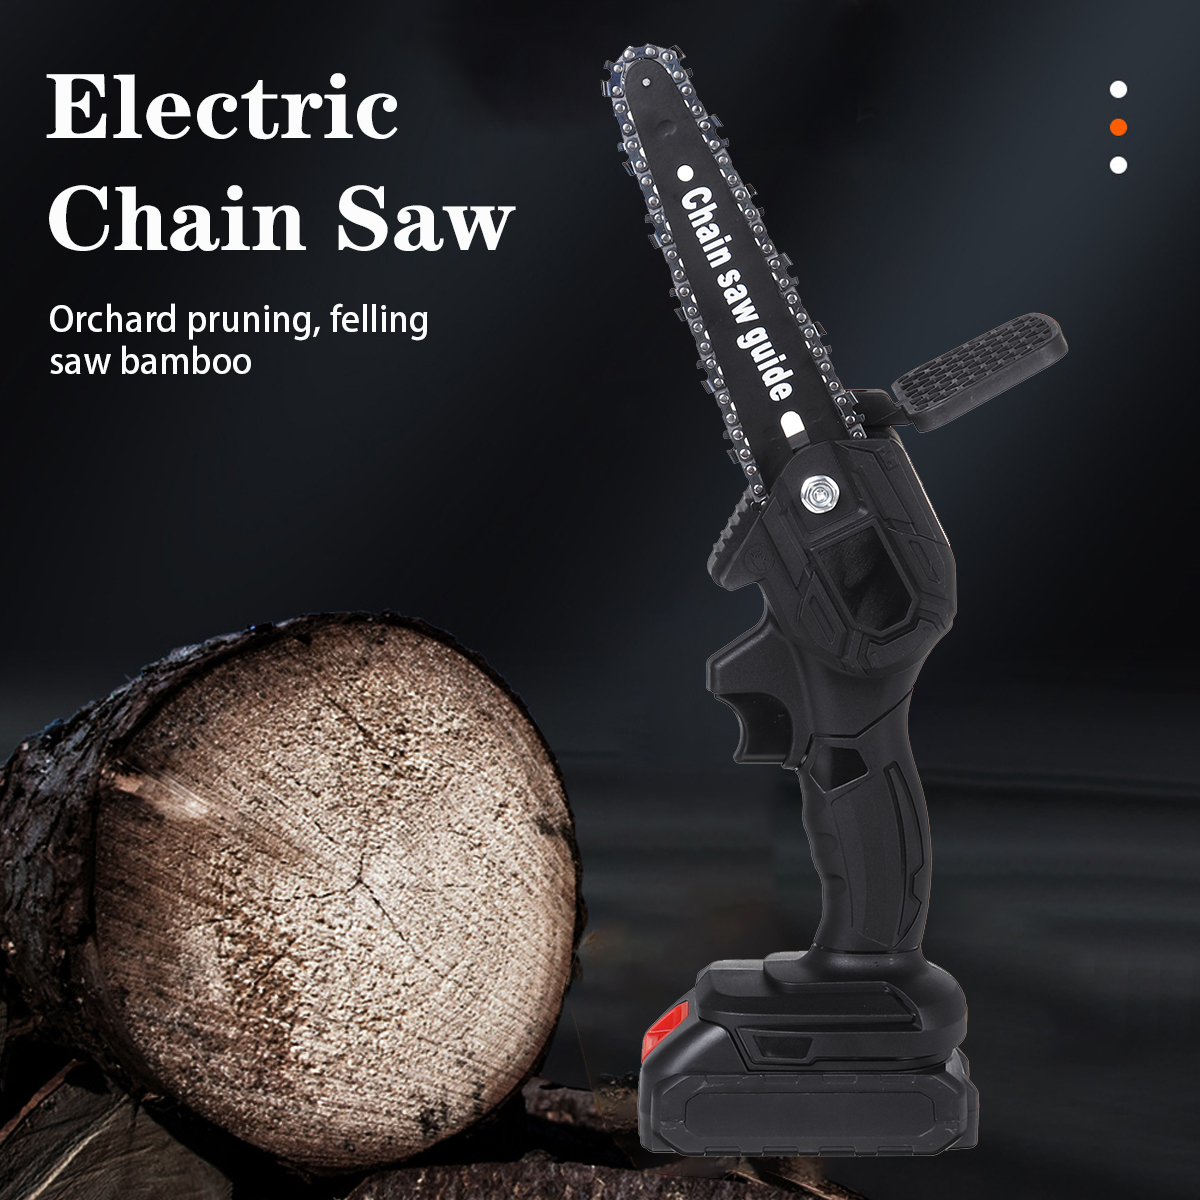 AC-100-240V-550W-Black-Cordless-Electric-Chain-Saw-Wood-Mini-Cutter-One-Hand-Saw-with-2-Batteries-Wo-1793565-2